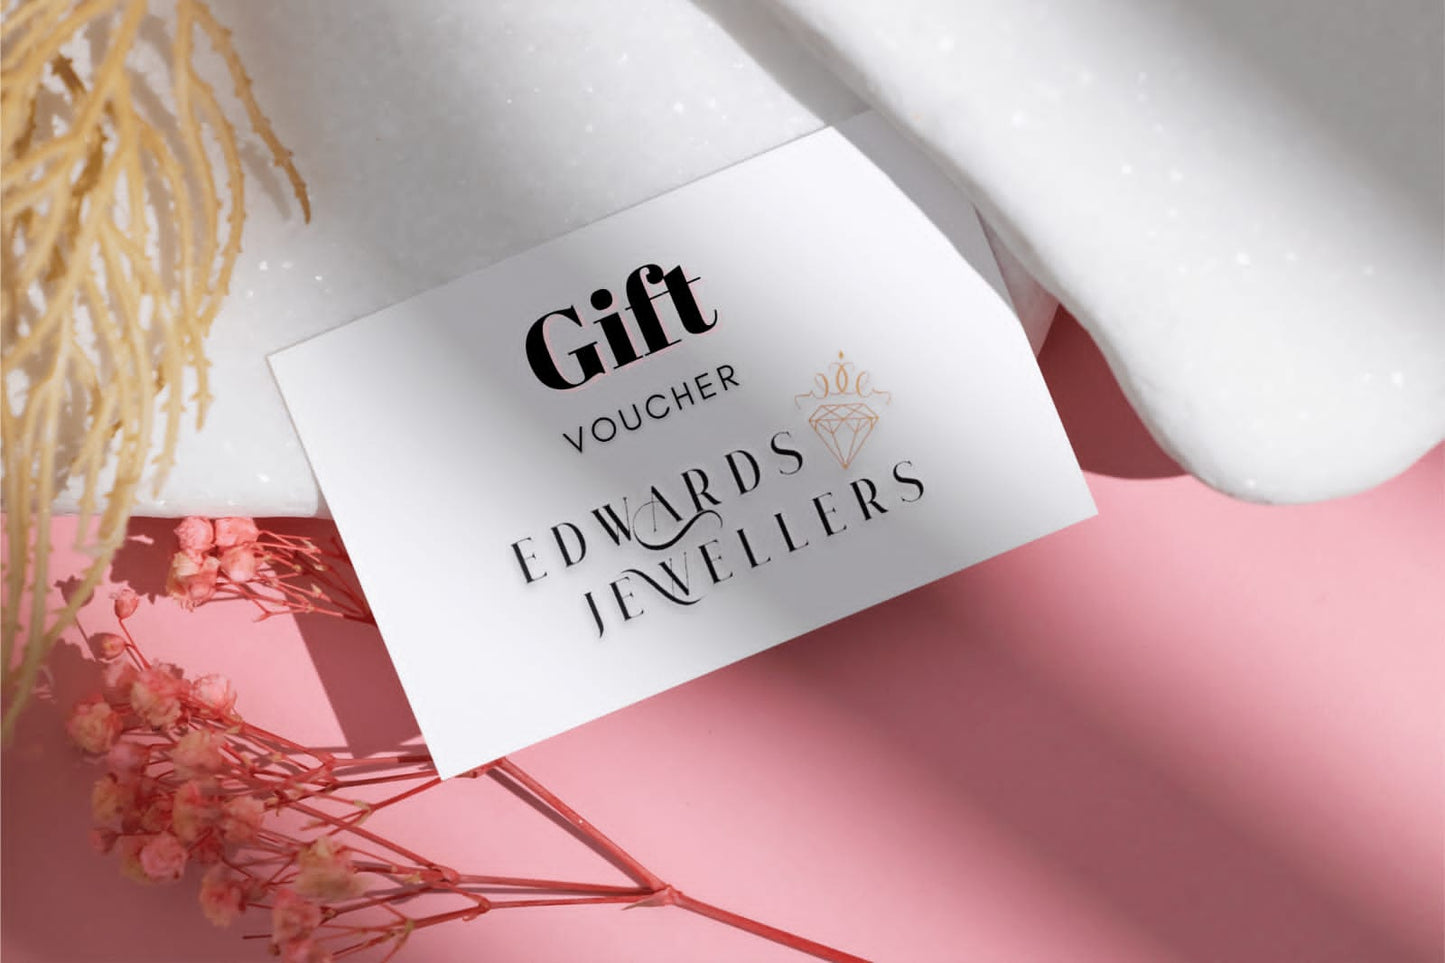 EDWARDS JEWELLERS gift card